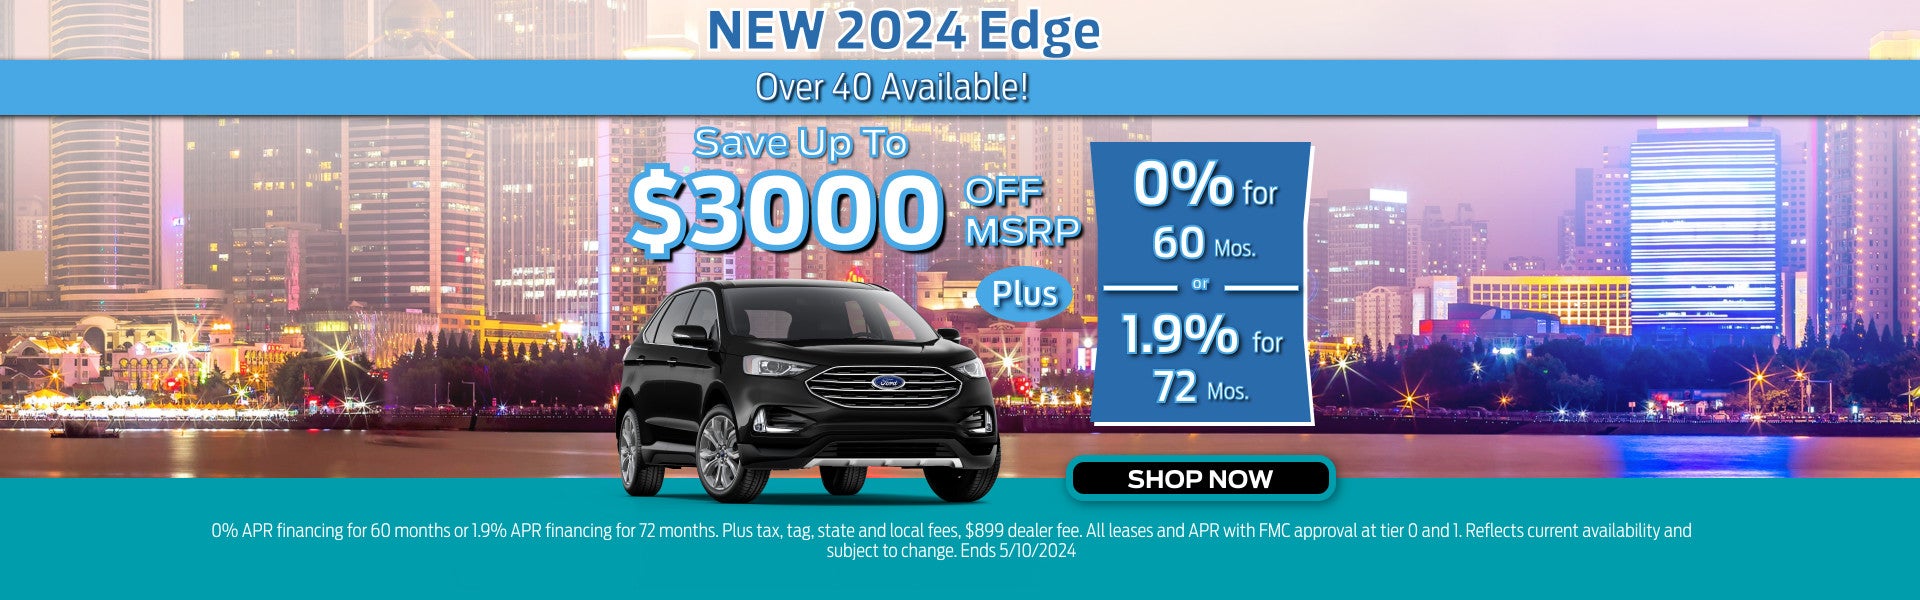 2024 Edge, Up to $3,000 off. 0% for 60 months